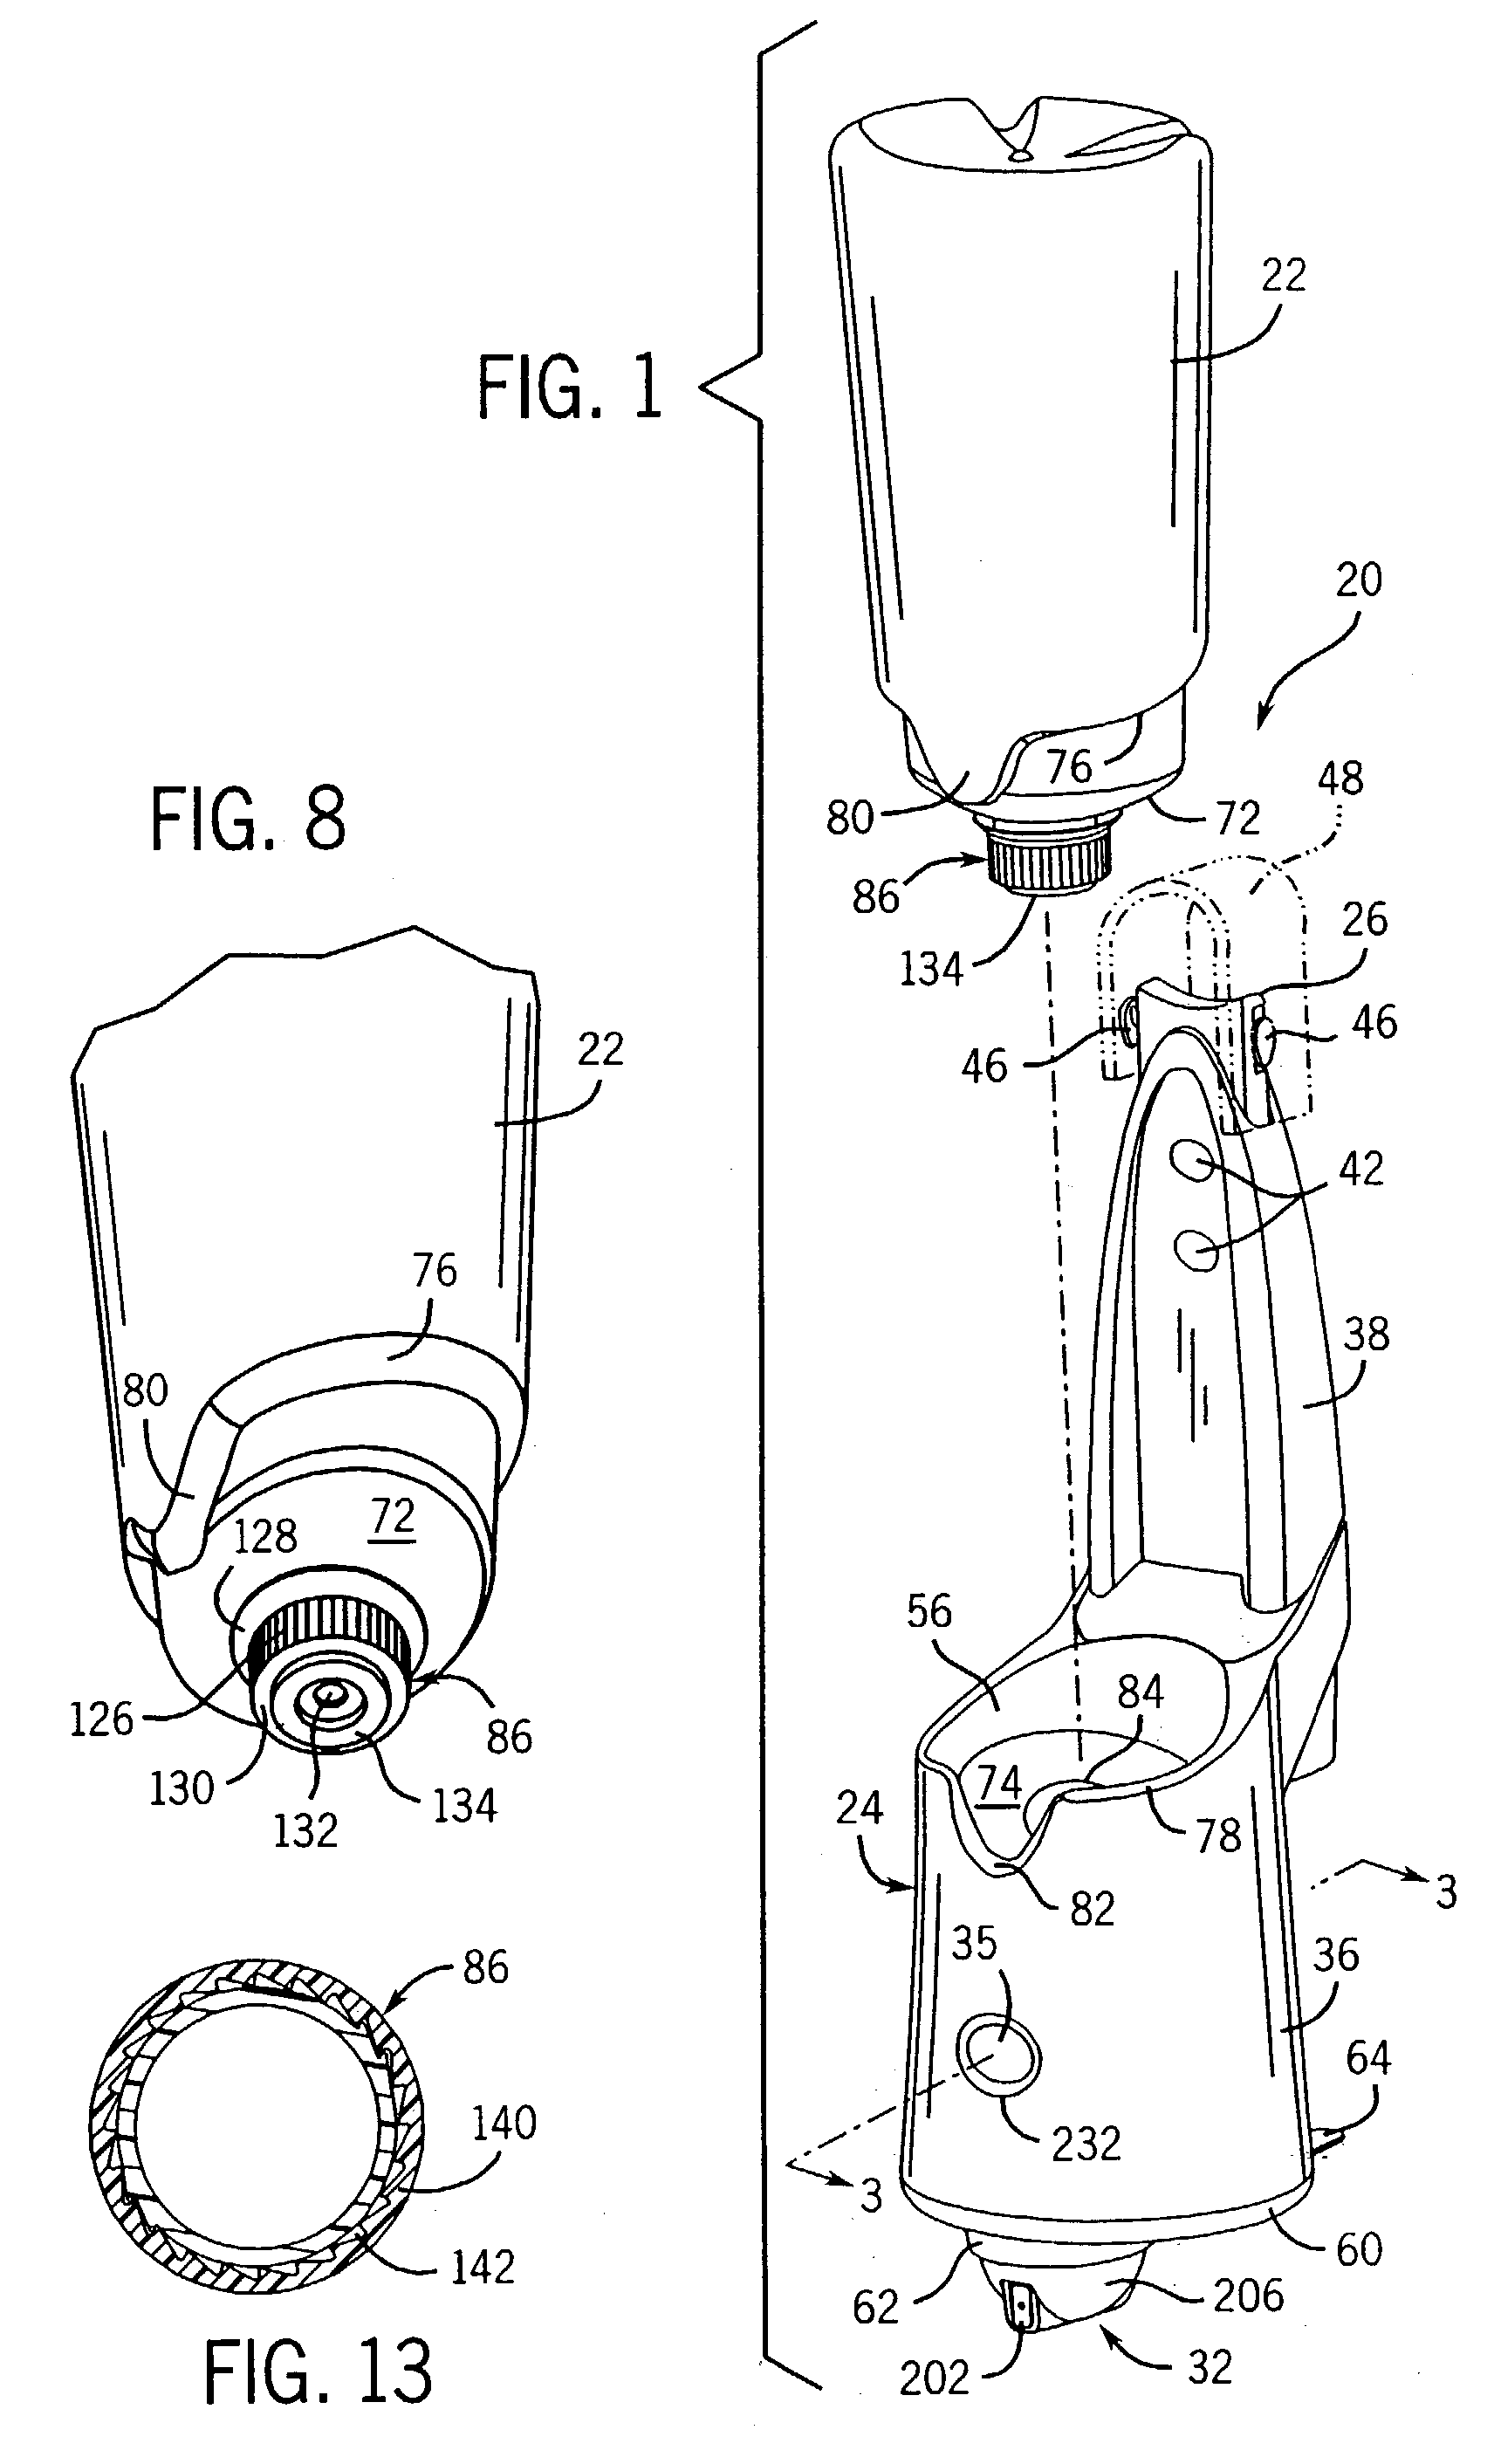 Automated cleansing sprayer